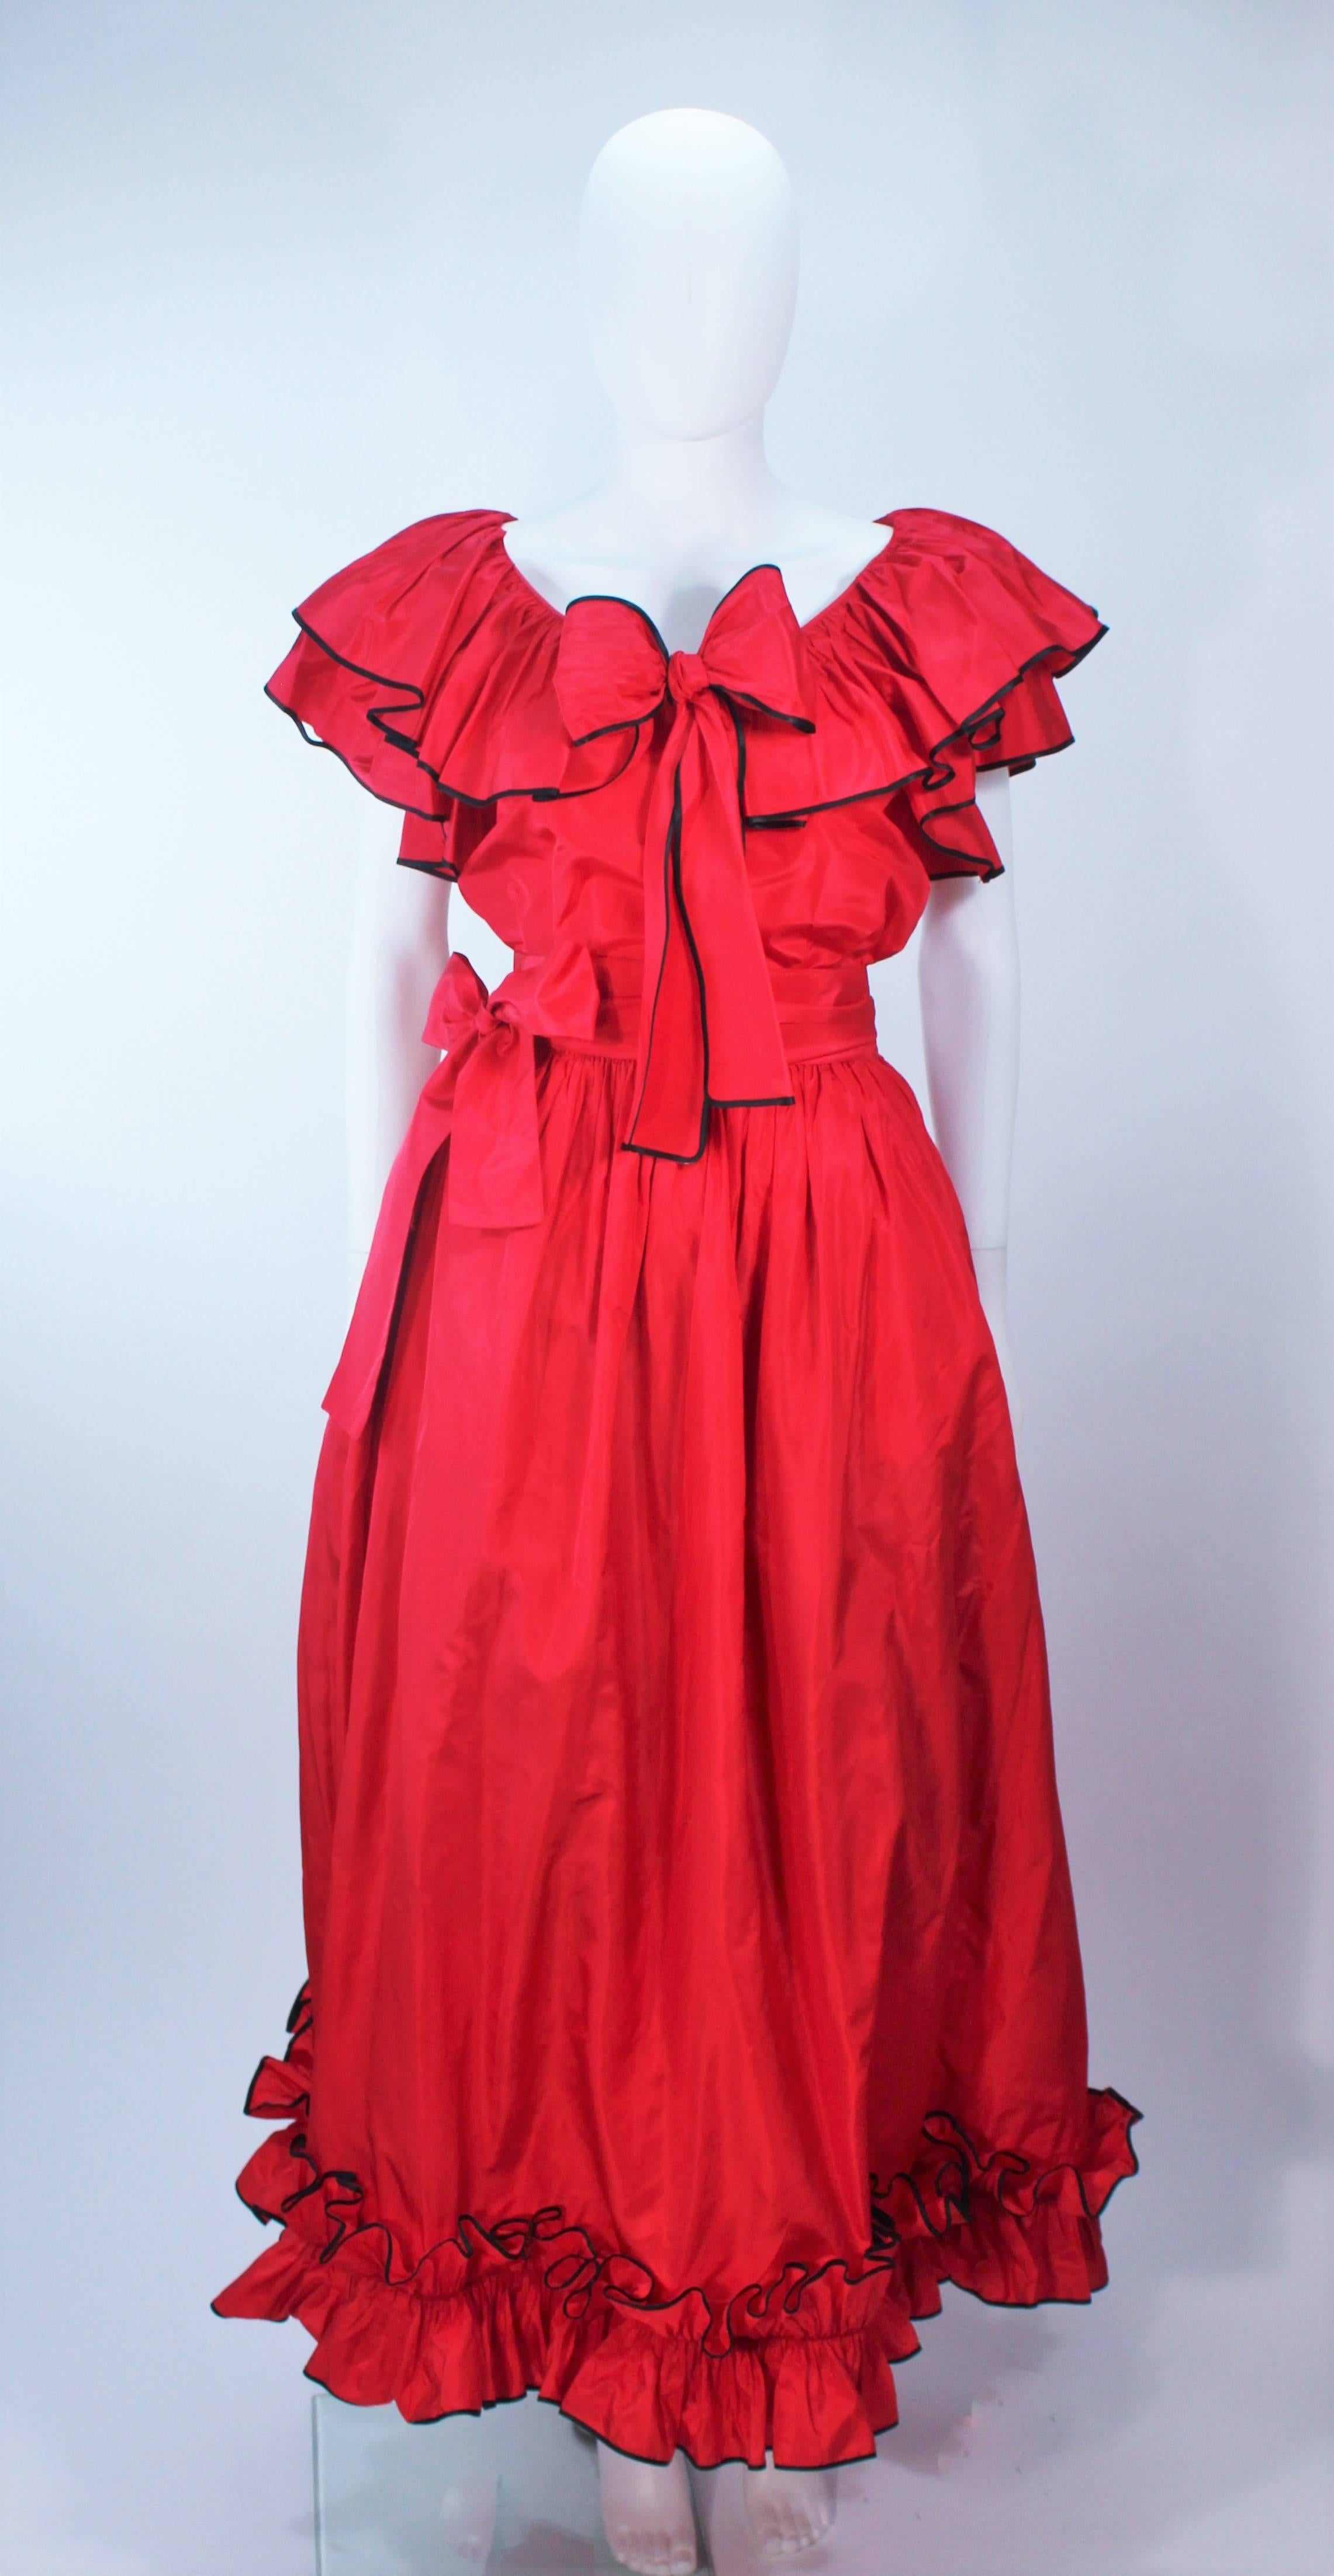 This Yves Saint Laurent  ensemble is composed of a red satin and features a ruffled trim with black. The ruffled blouse features a center front bow. The skirt was shot with crinoline and has a side zipper closure with pockets. Comes with belt. In